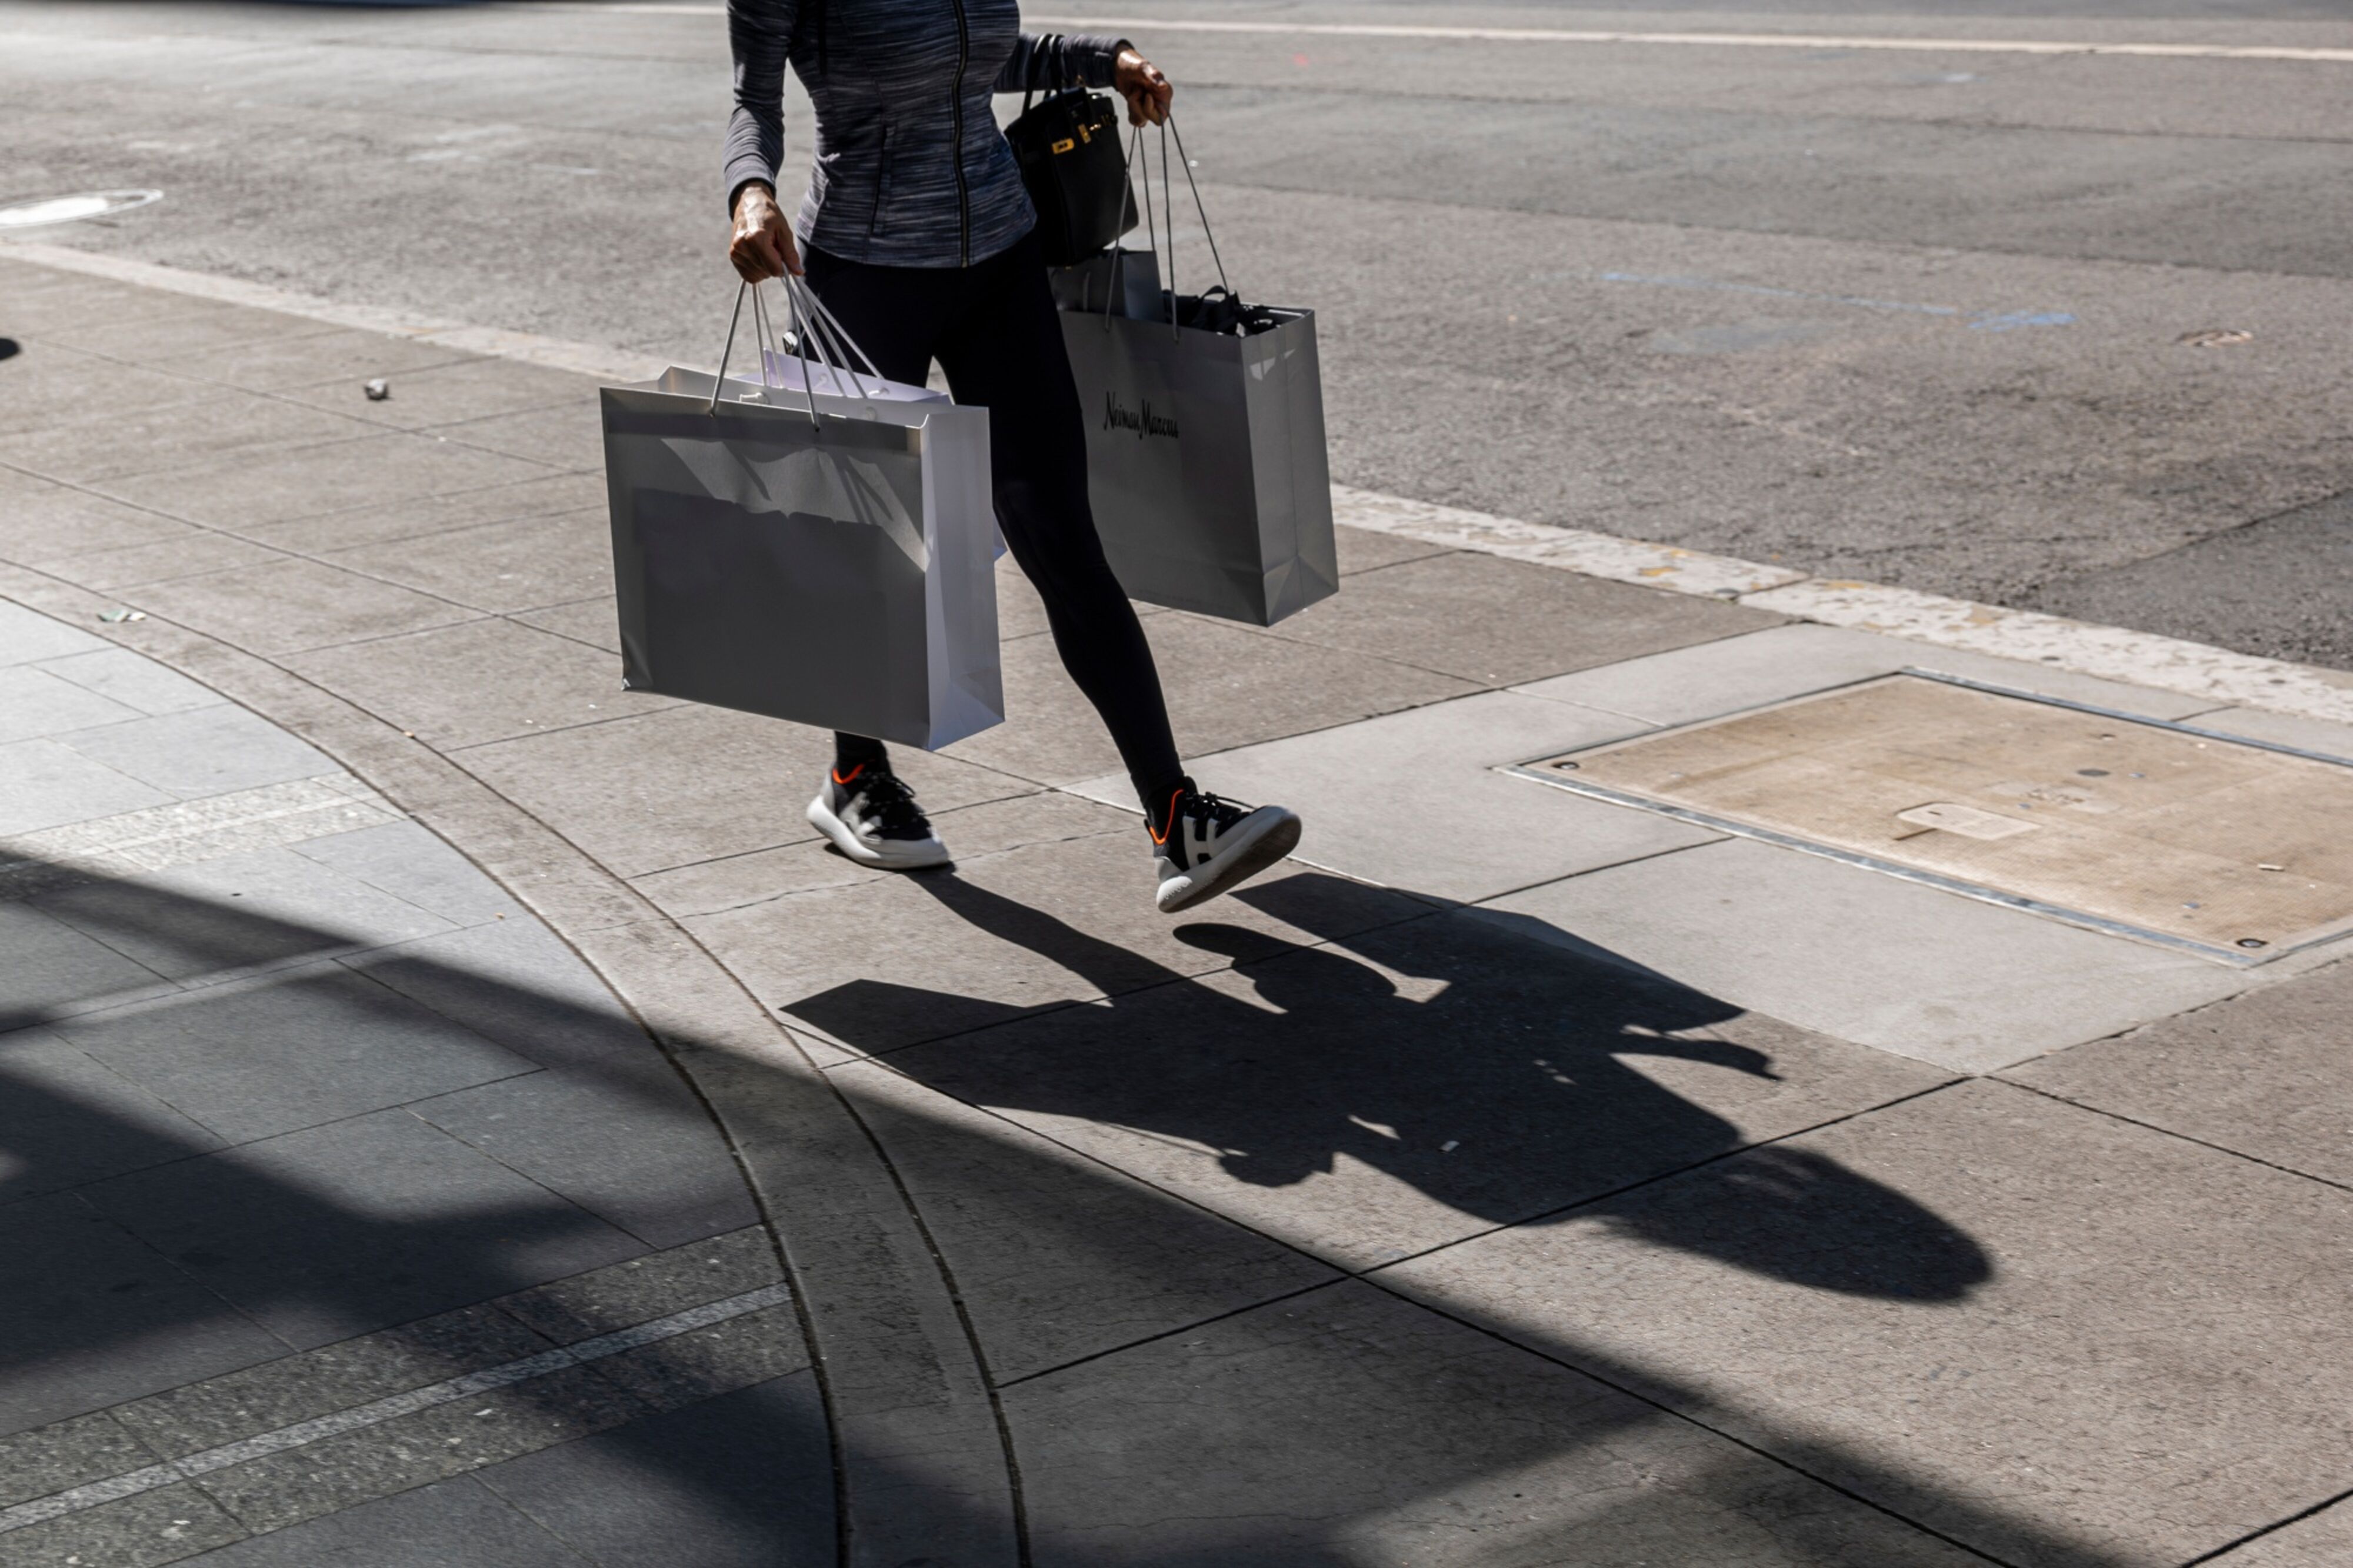 Photo: A pedestrian carries shopping bags in San Francisco, on June 1, 2022. Photographer: David Paul Morris/Bloomberg.